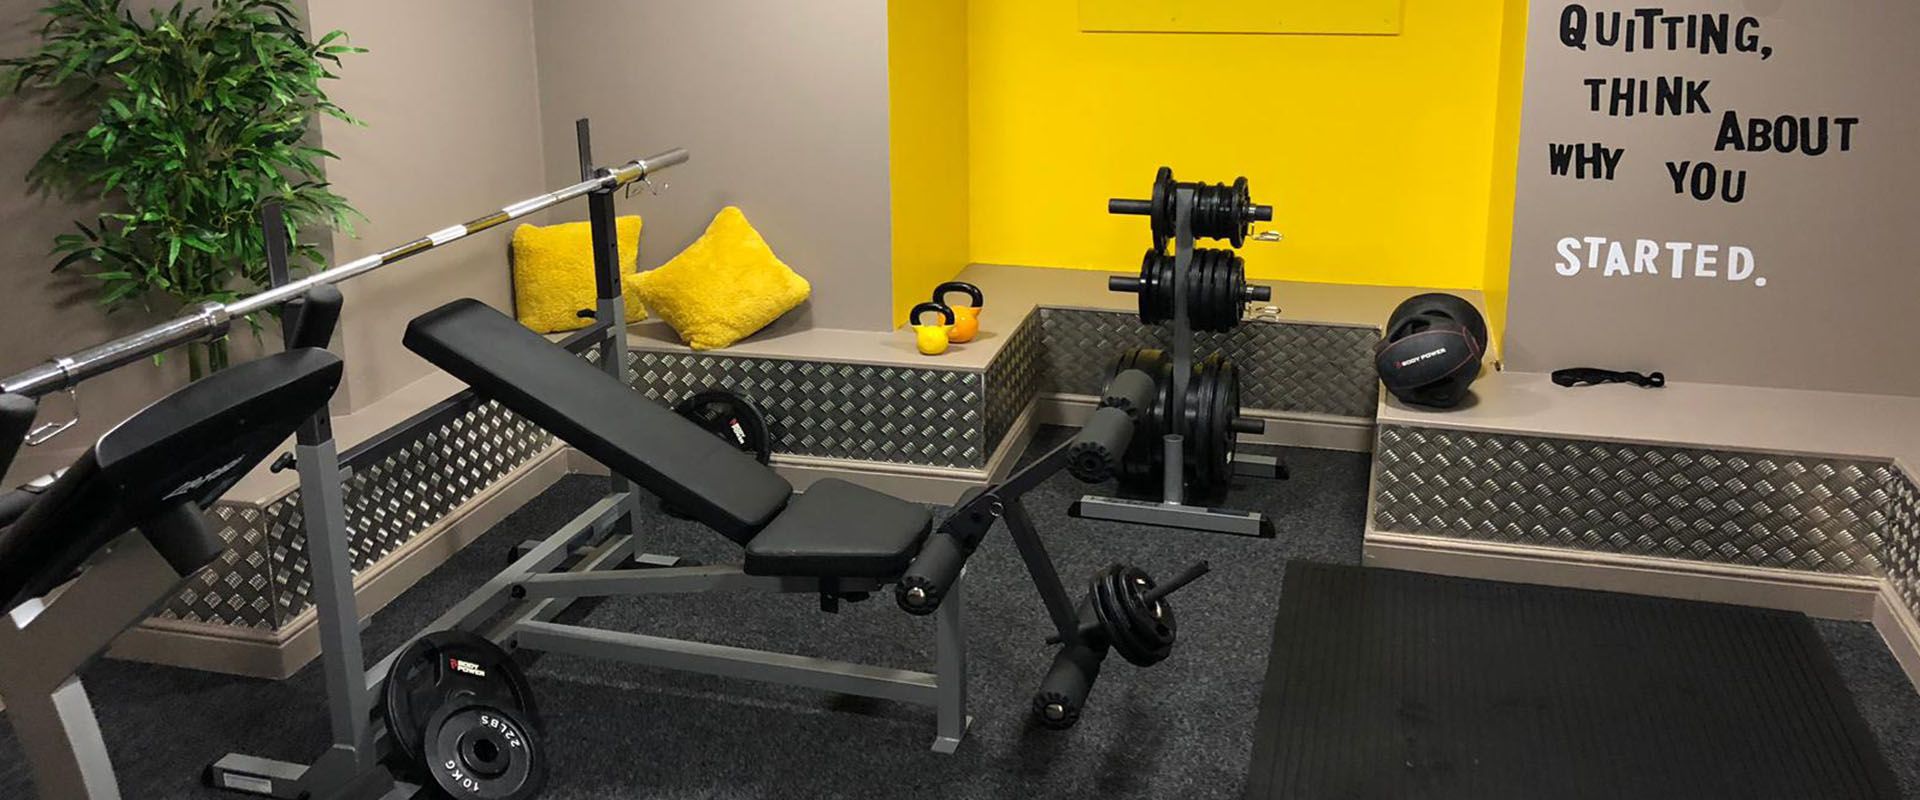 A free onsite gym available for tenants only